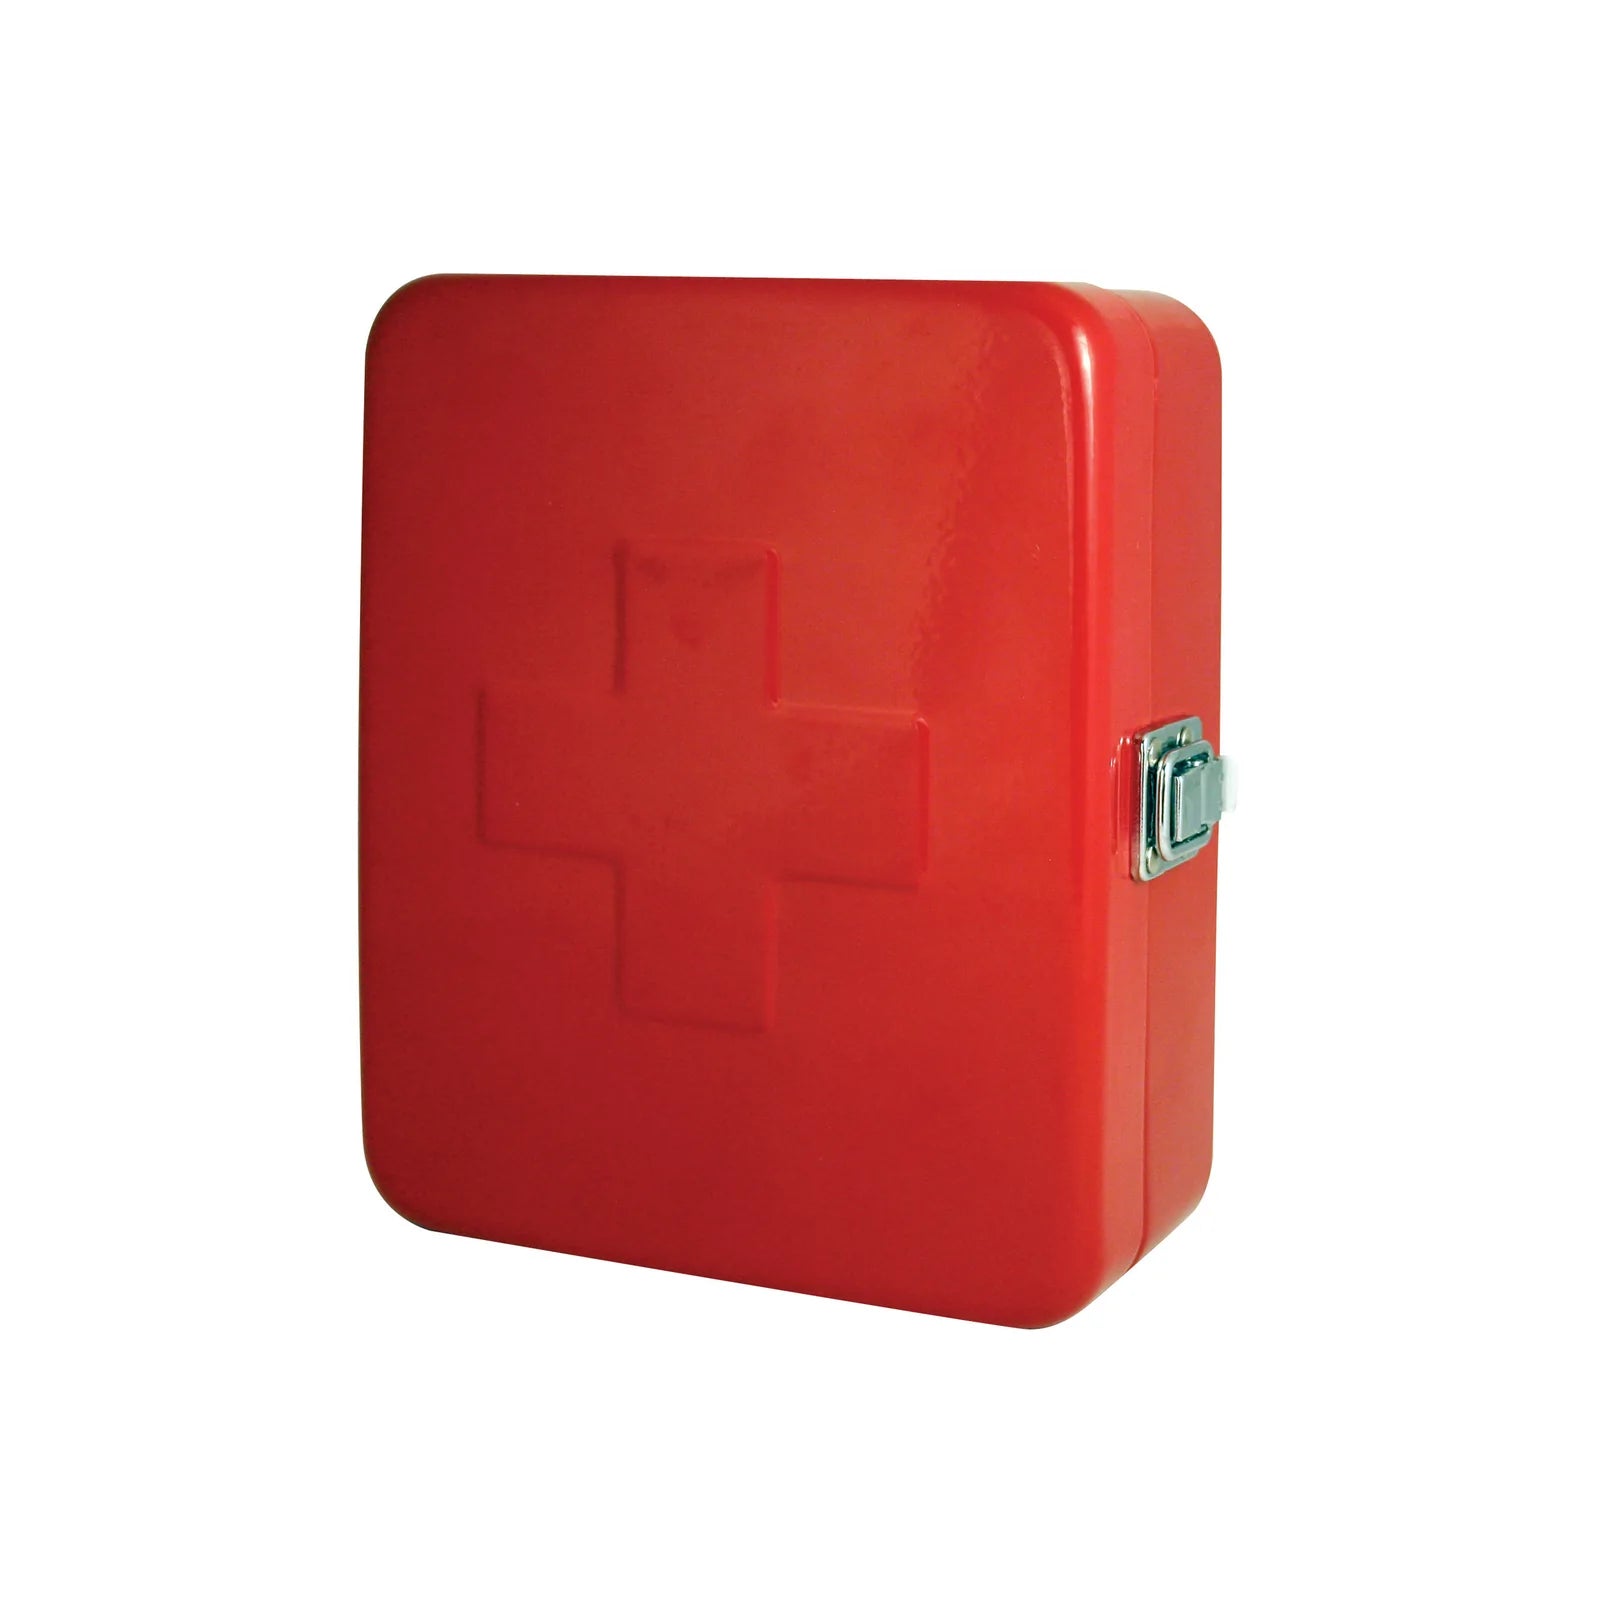 Red First-Aid Box